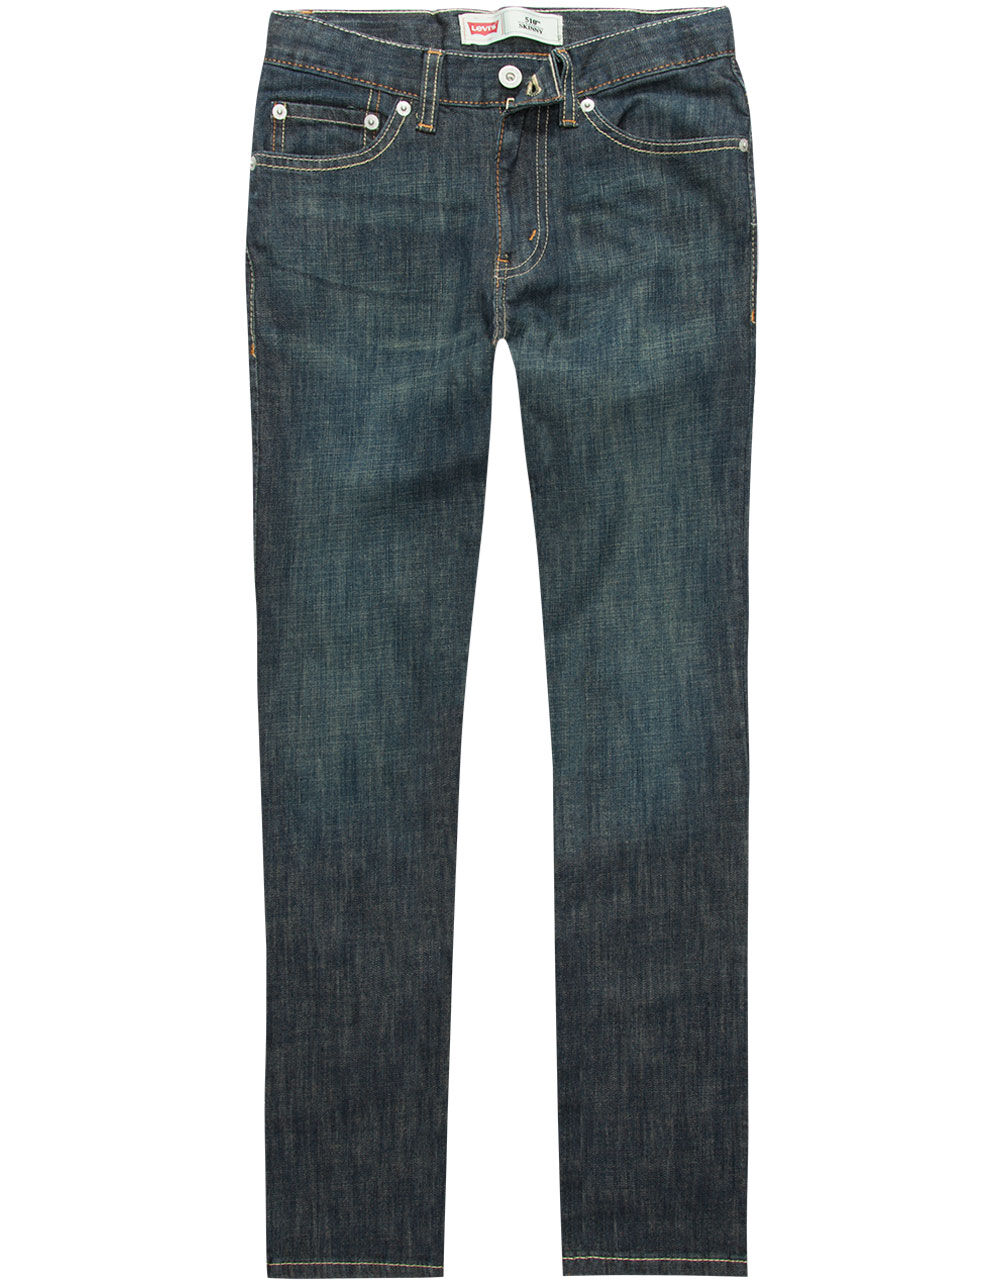 LEVI'S 510 Cover Up Boys Skinny Jeans image number 0